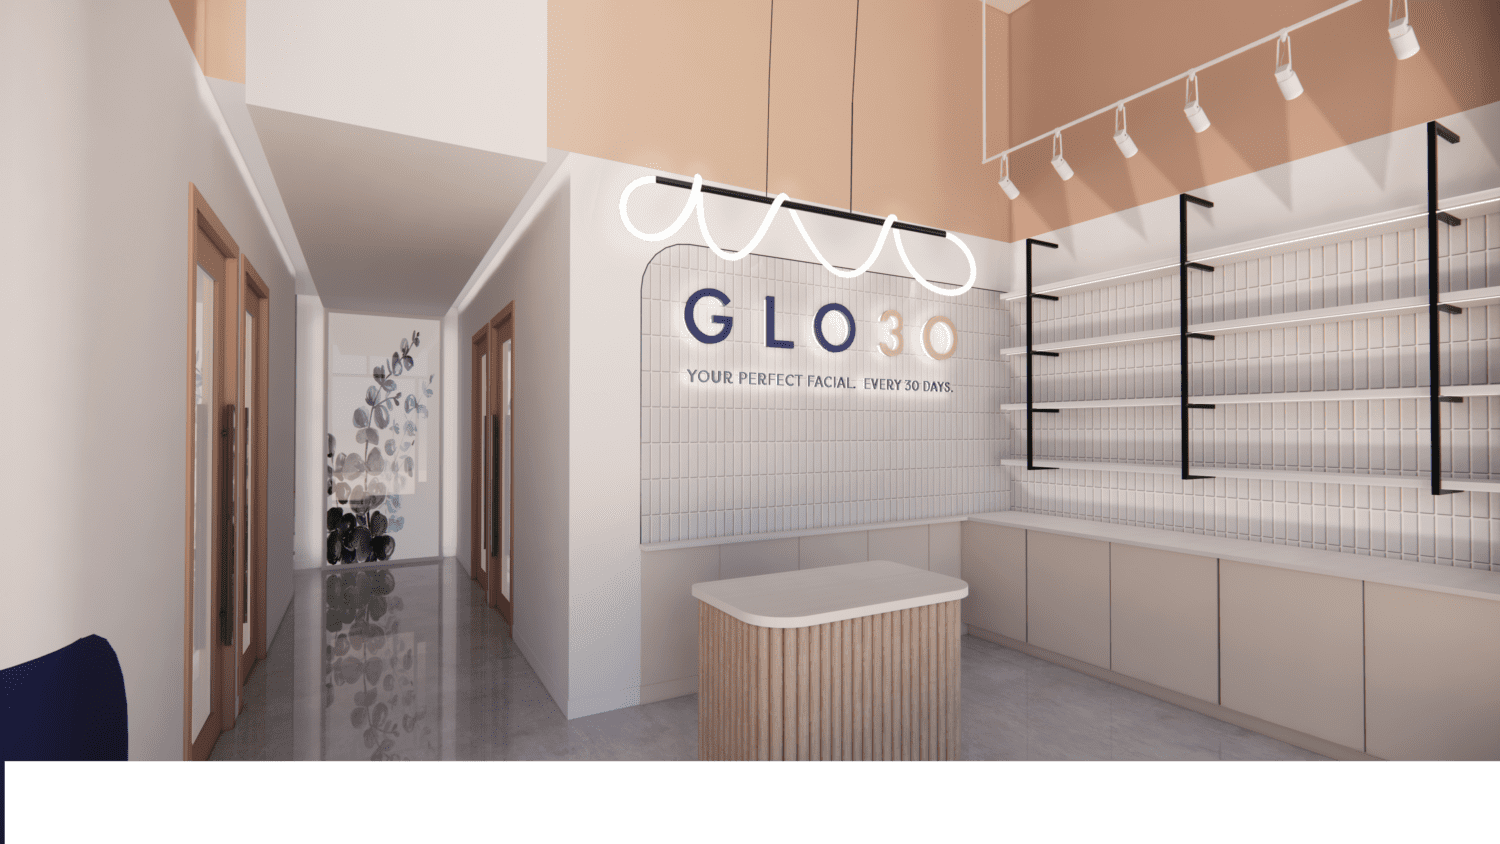 Intrerior of a GLO3 store